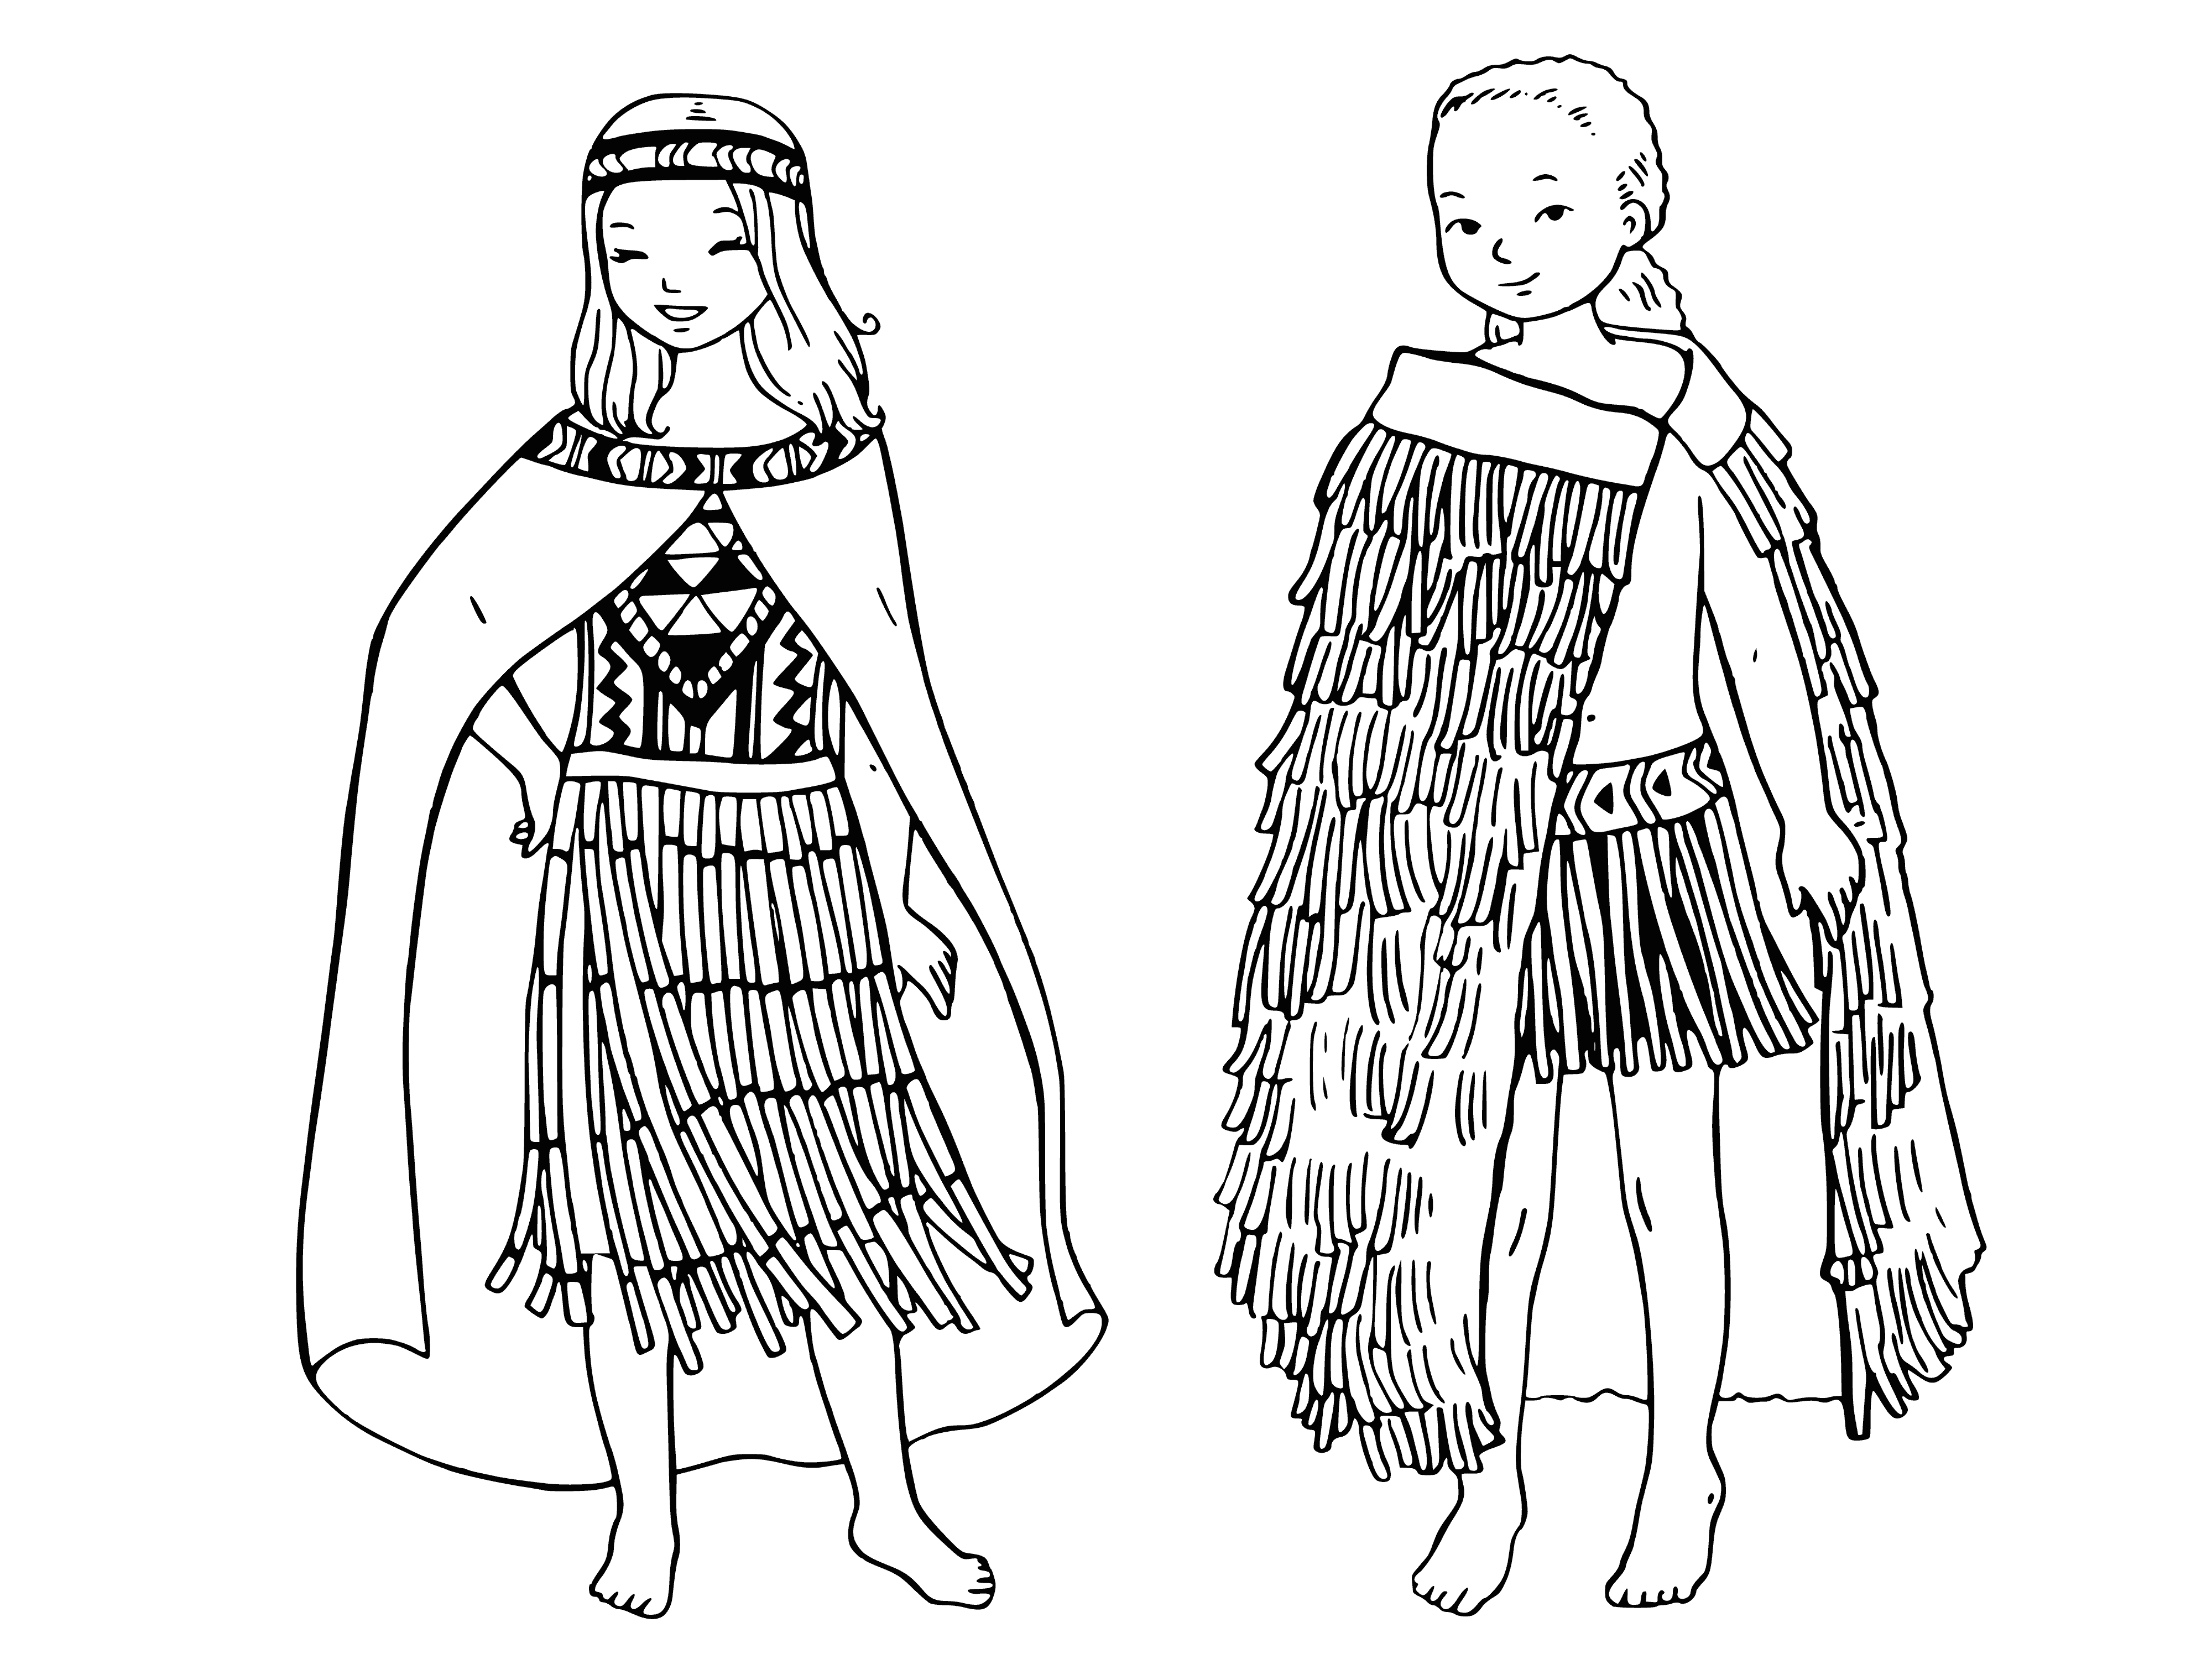 coloring page: Two kids in traditional Maori clothing: boy in shirt & pants, girl in dress & sash, both wearing black shoes. #MaoriCulture